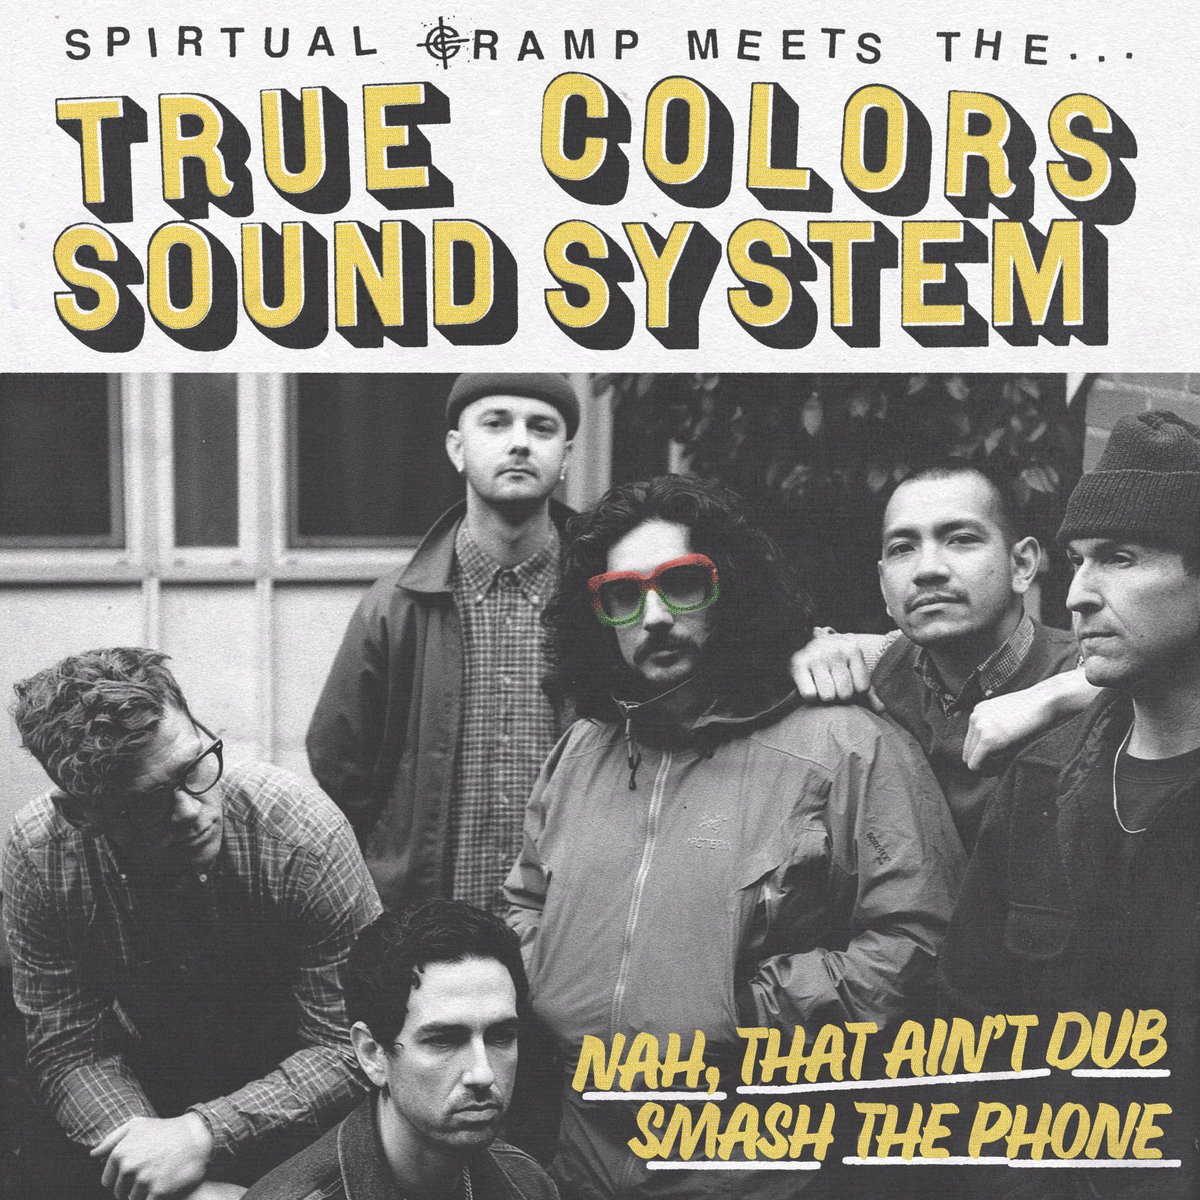 .@Spiritual_Cramp meets the True Colors Sound System is streaming on all platforms now ☎️ spiritualcramp.lnk.to/dub